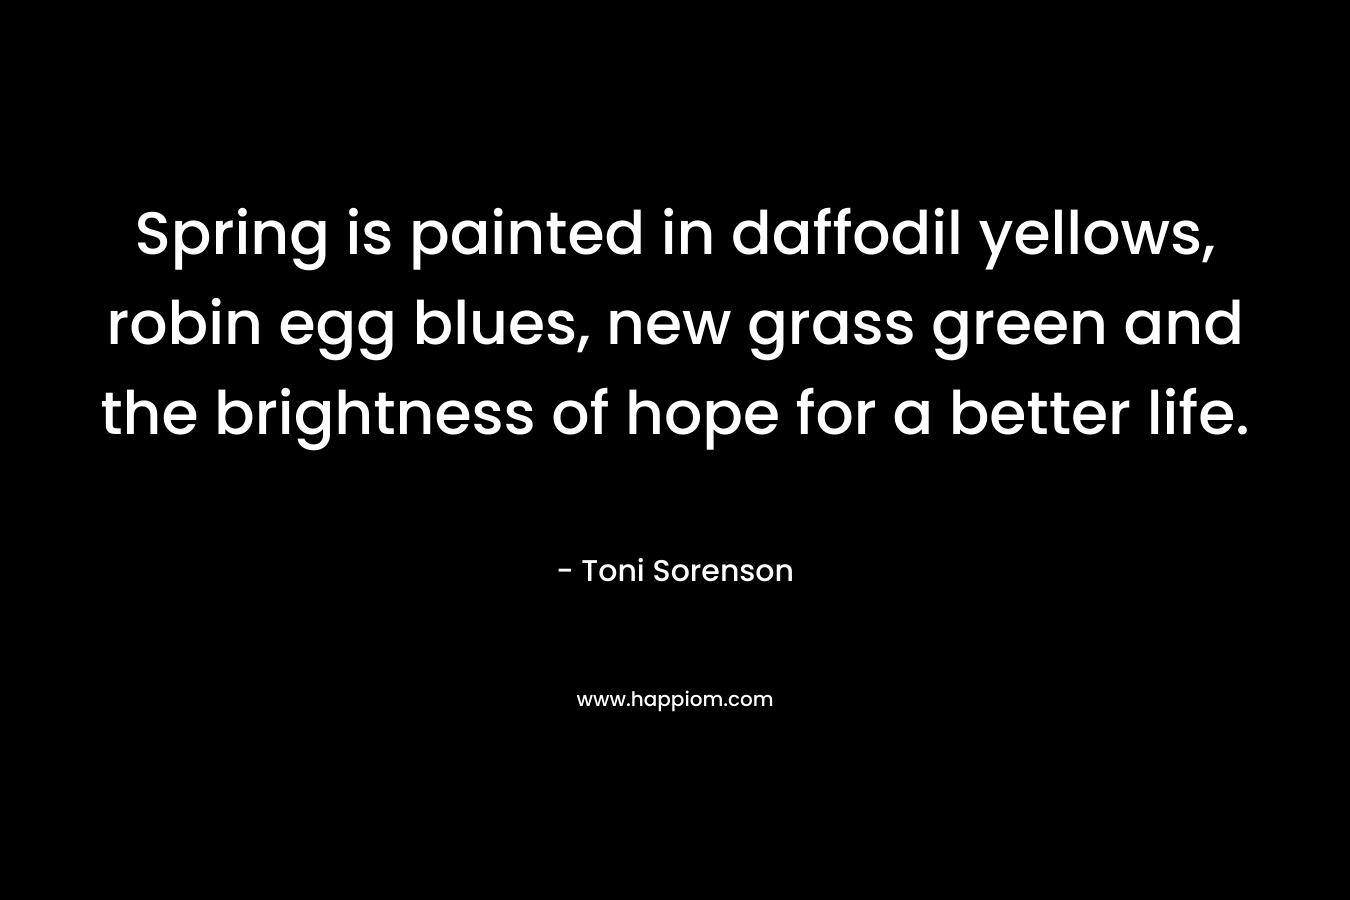 Spring is painted in daffodil yellows, robin egg blues, new grass green and the brightness of hope for a better life. – Toni Sorenson